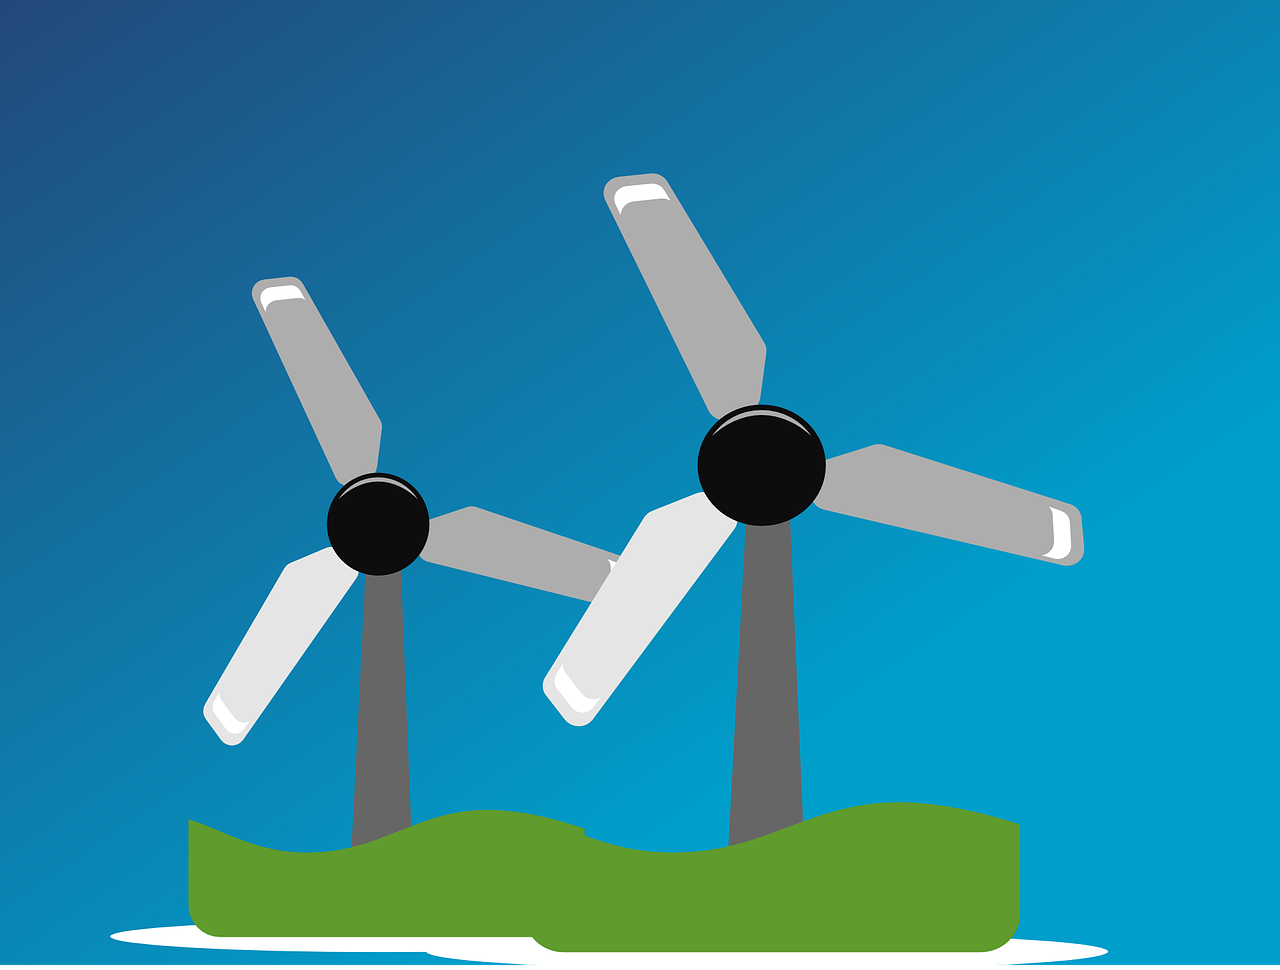 a couple of windmills sitting on top of a green field, an illustration of, by Leon Polk Smith, purism, offshore winds, middle close up composition, jet turbine, version 3